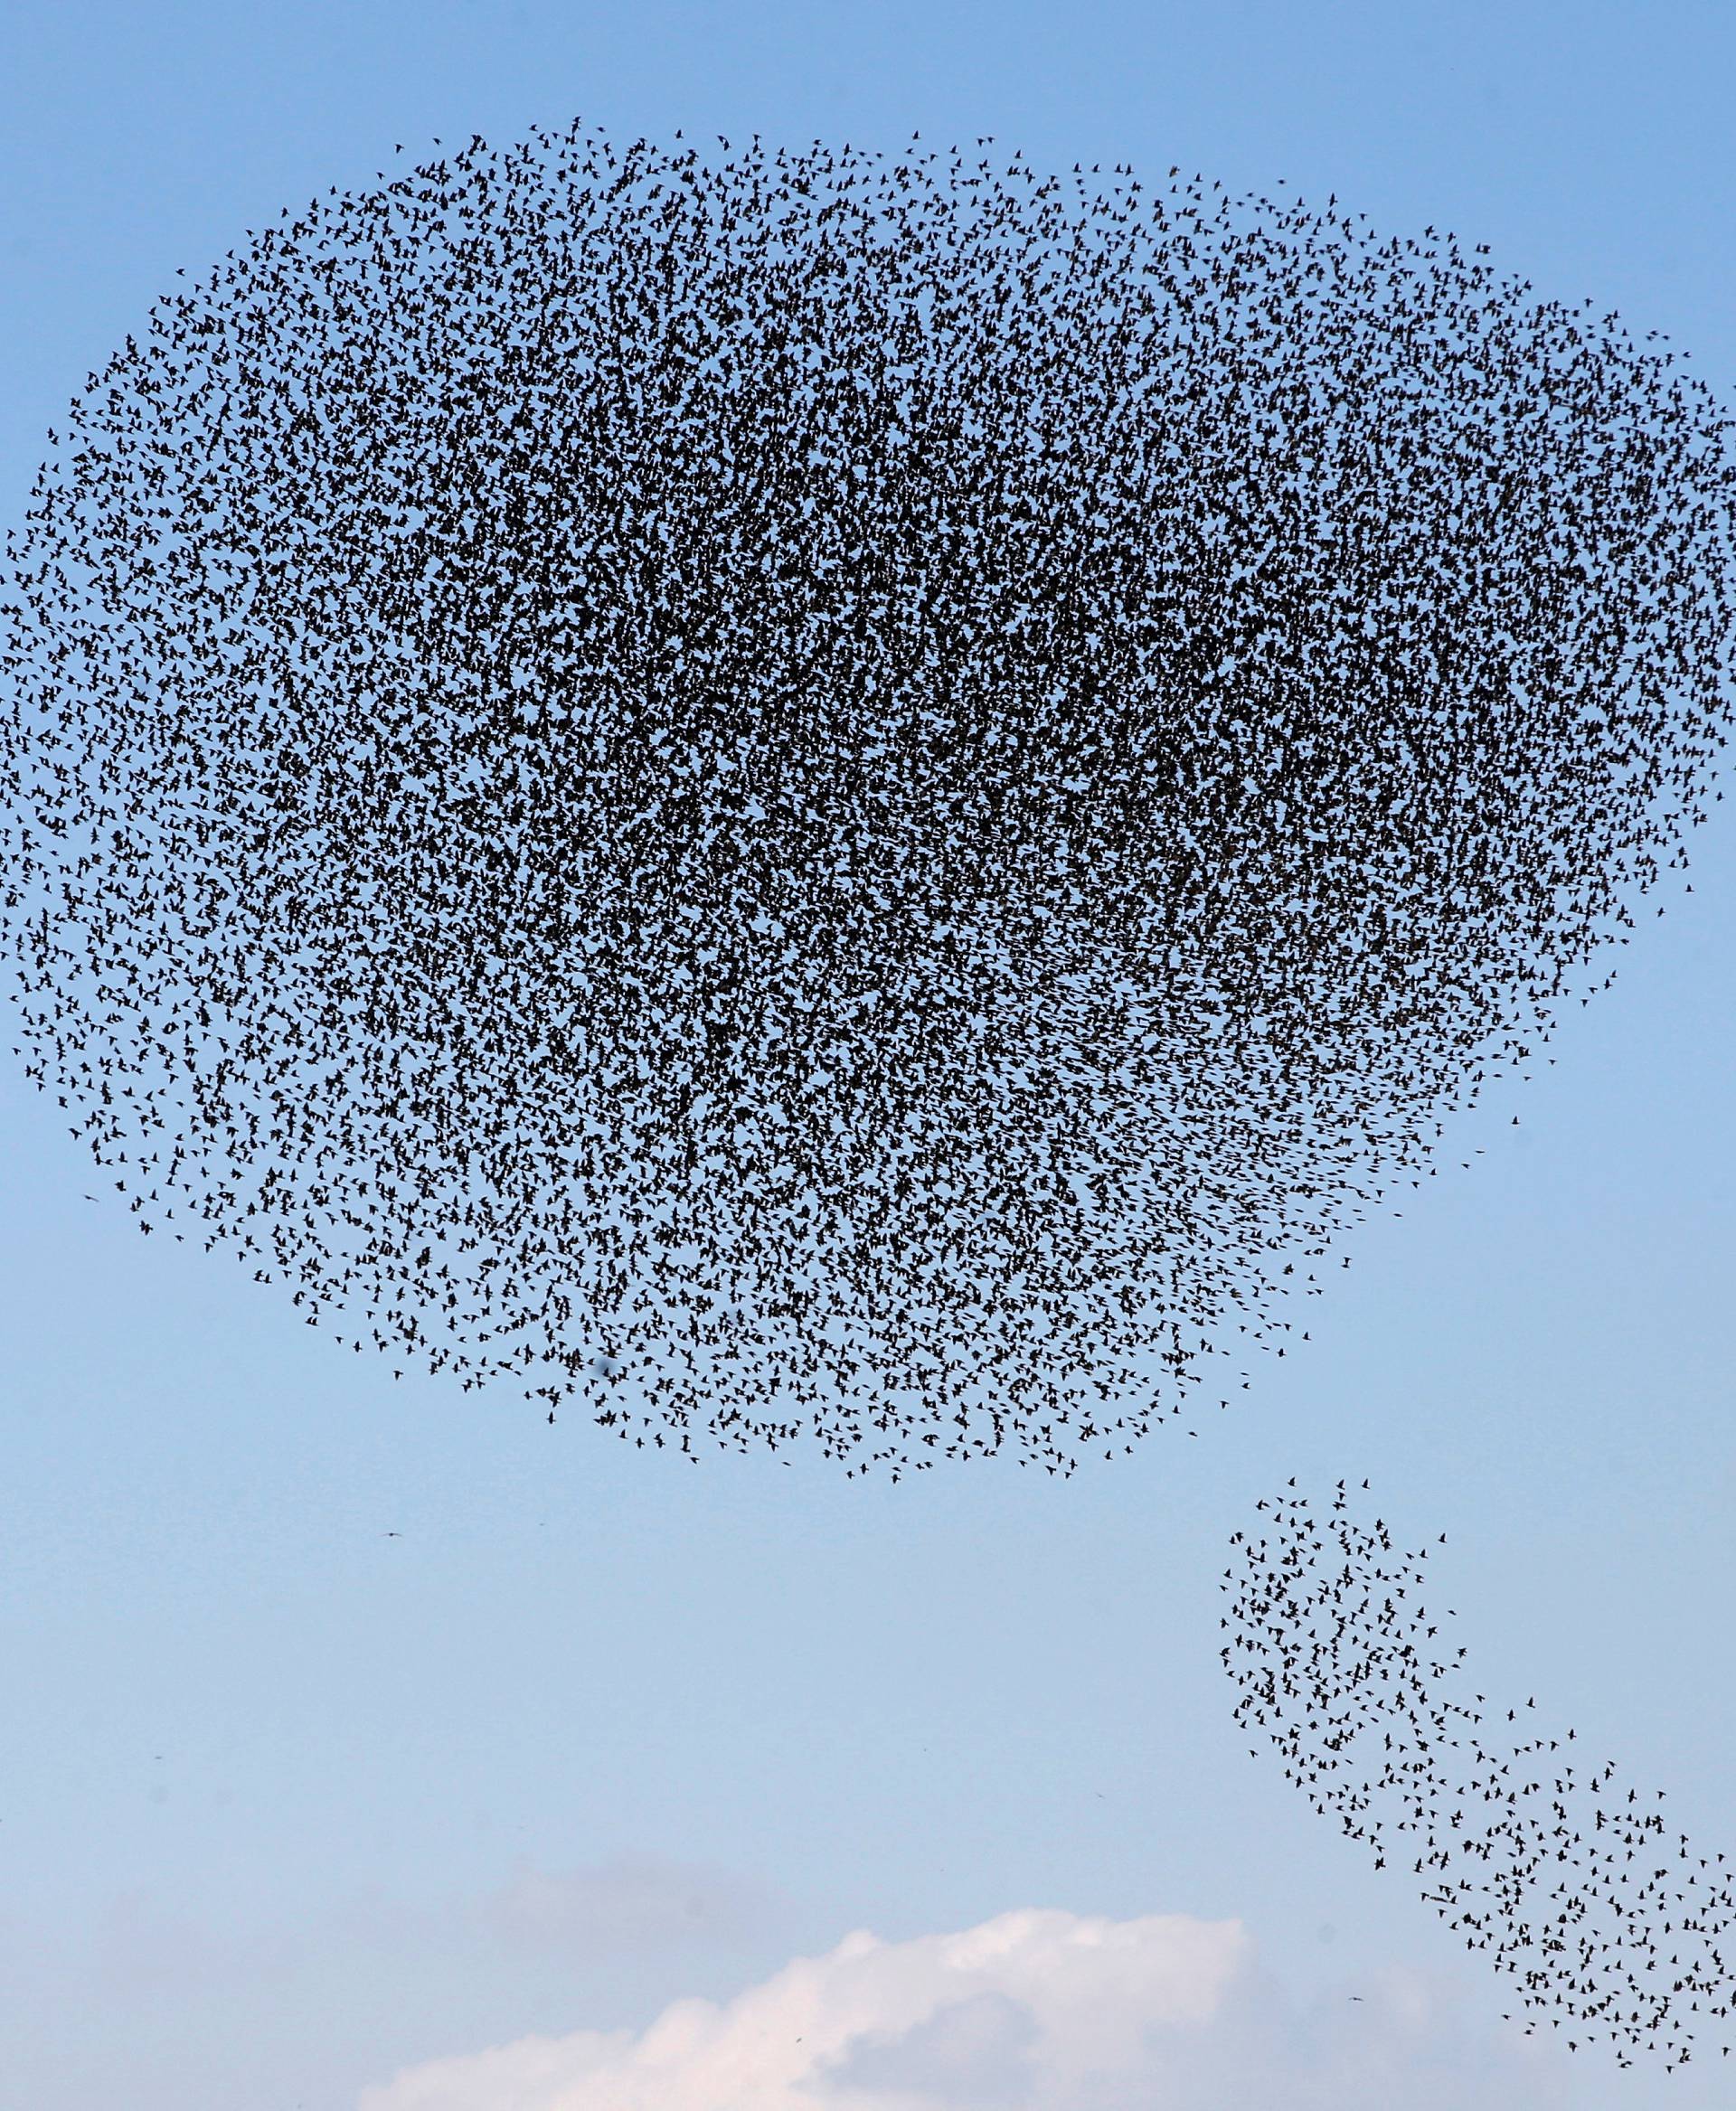 A murmuration of migrating starlings is seen across the sky near the city of Beer Sheva, southern Israel